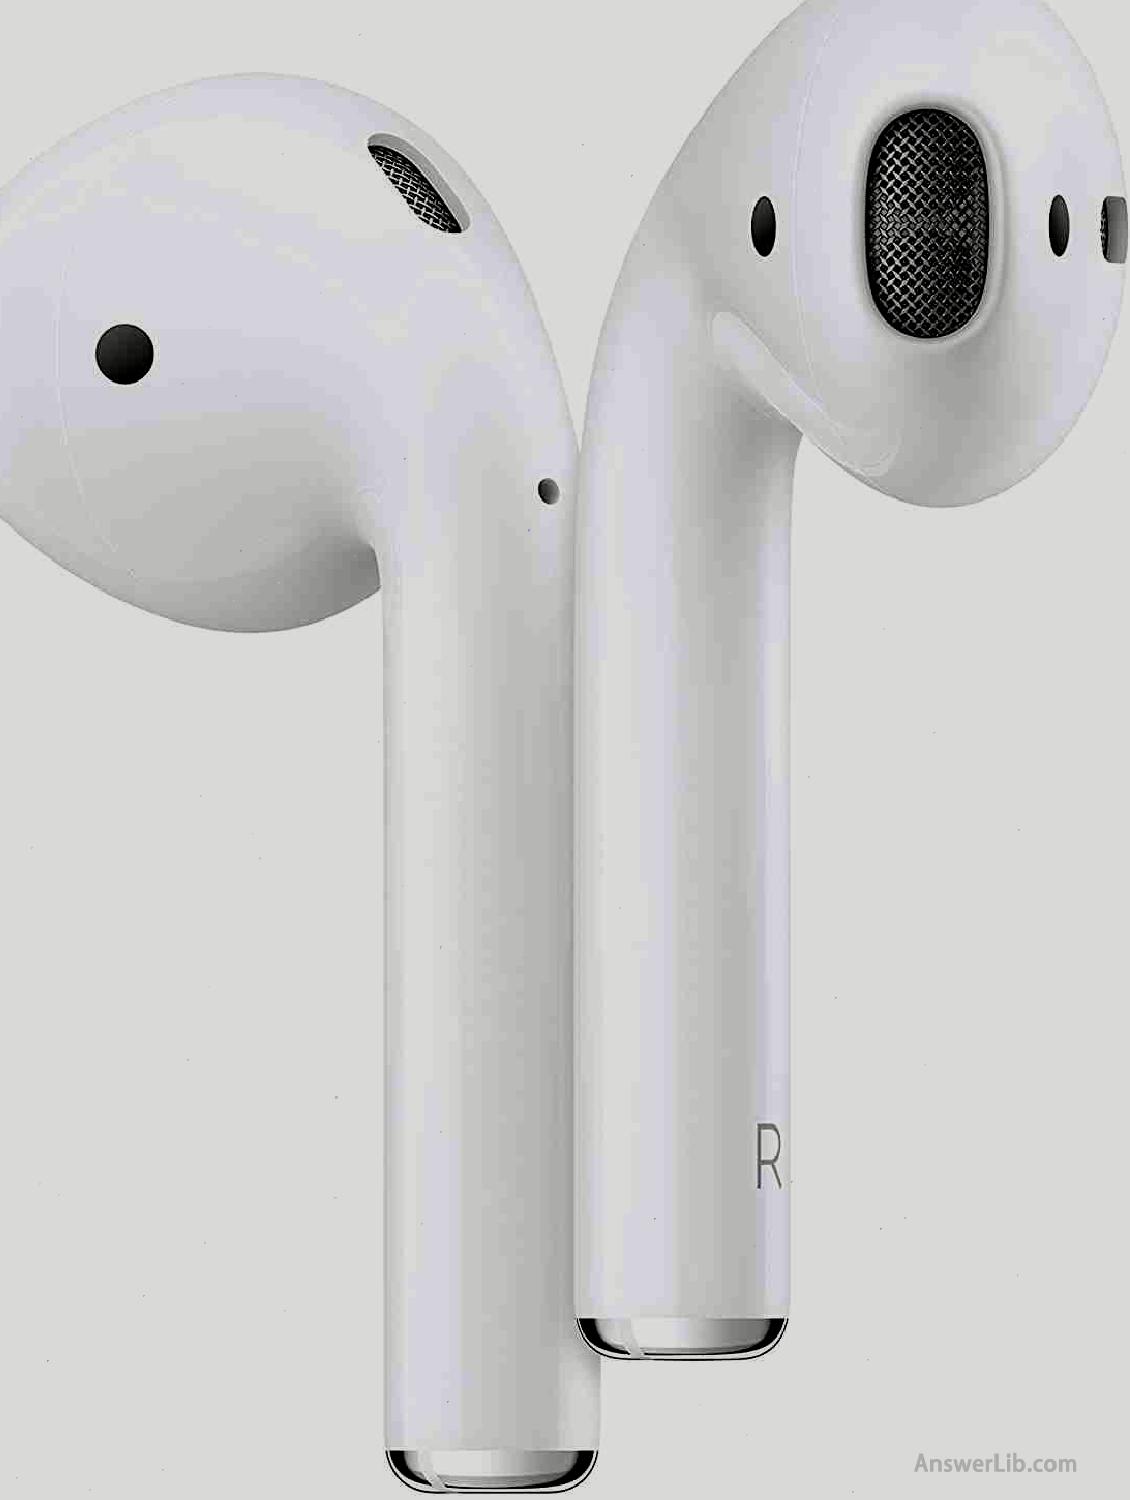 Best Budget Apple headset: AirPods (2nd Generation)